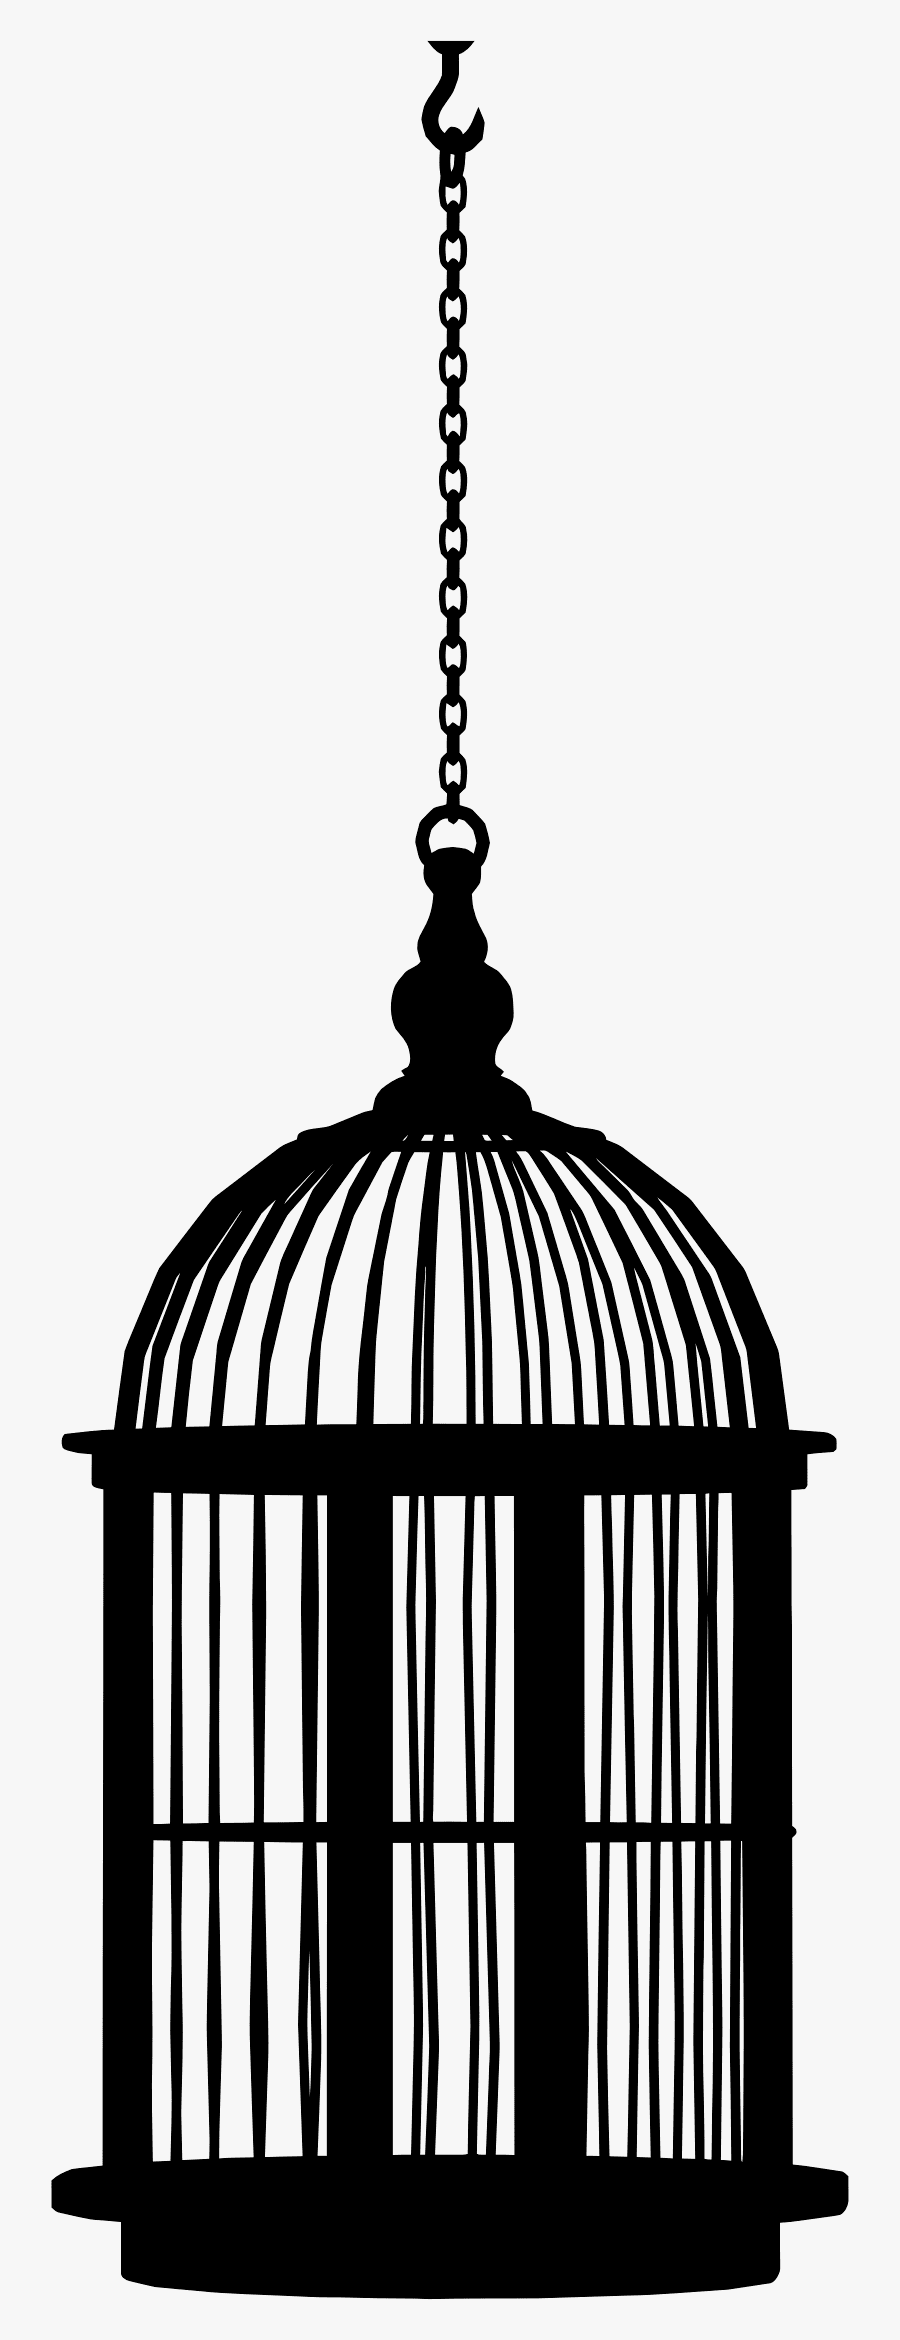 Cage-bird - Cage Without A Bird, Transparent Clipart